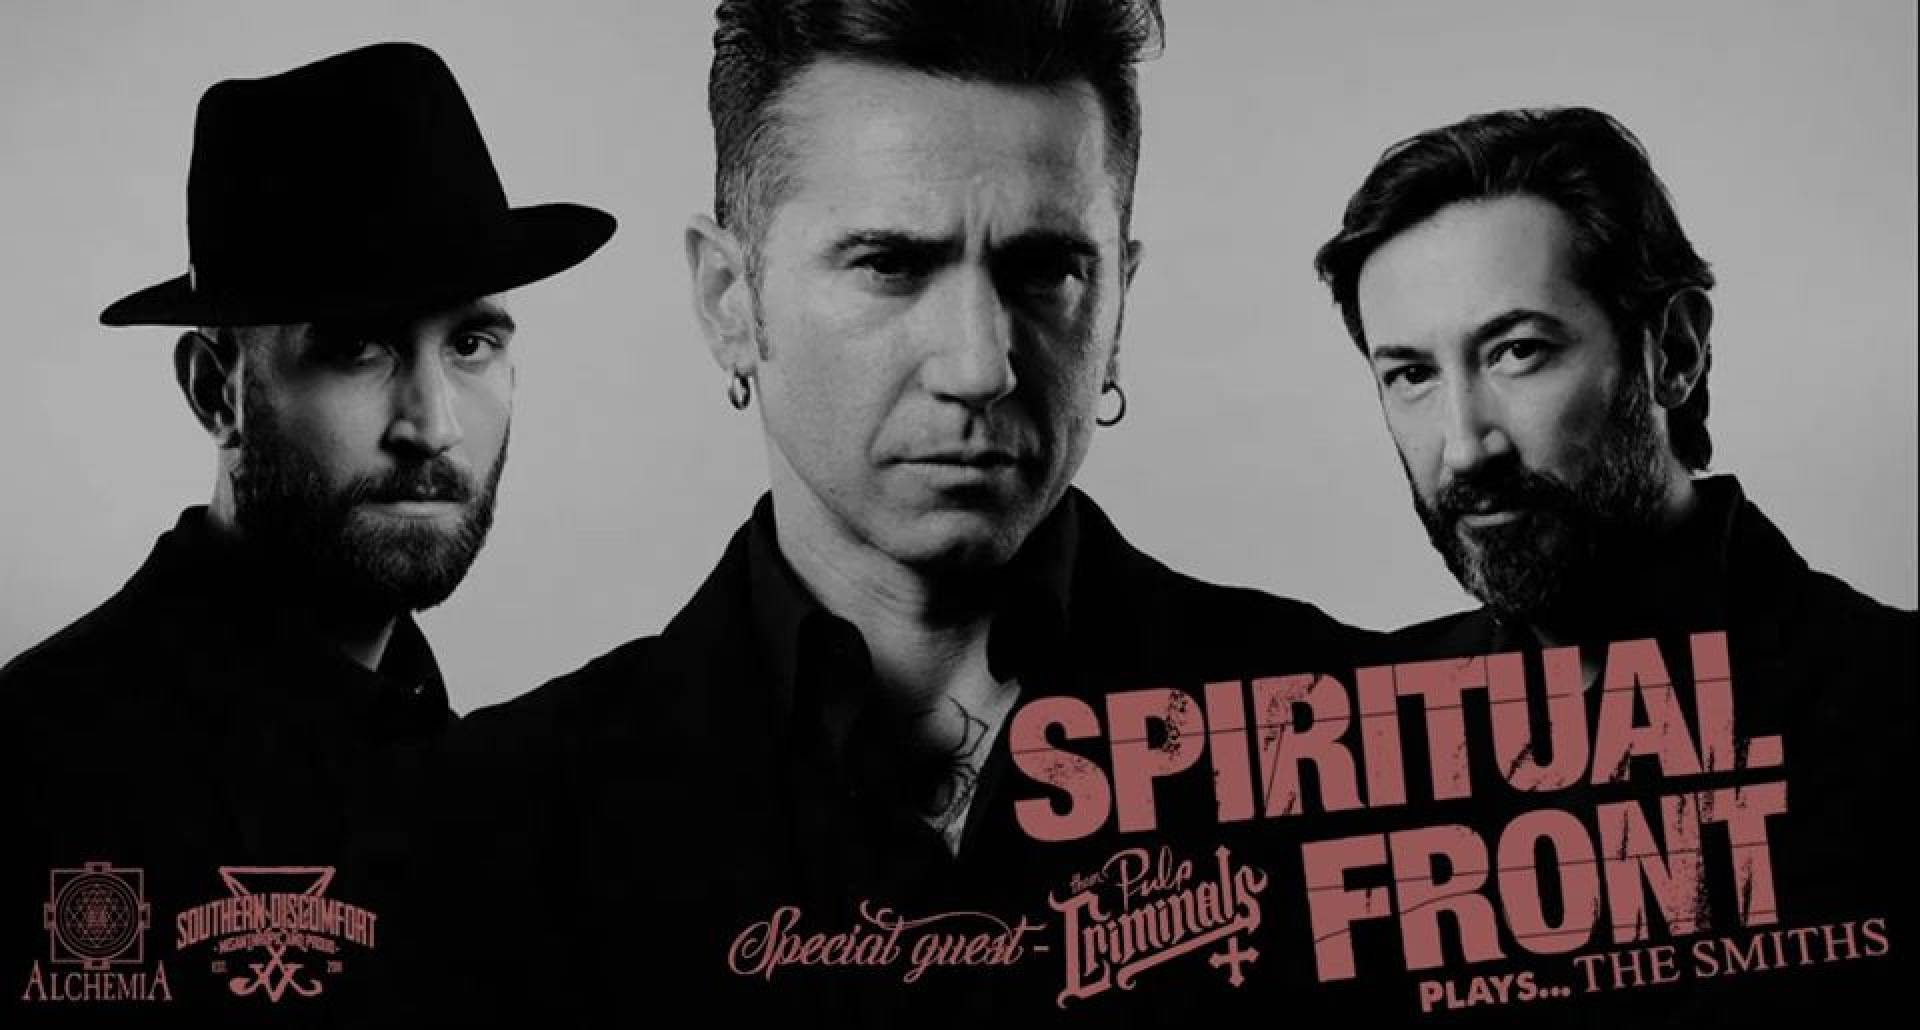 Spiritual Front plays The Smiths + guest: Them Pulp Criminals